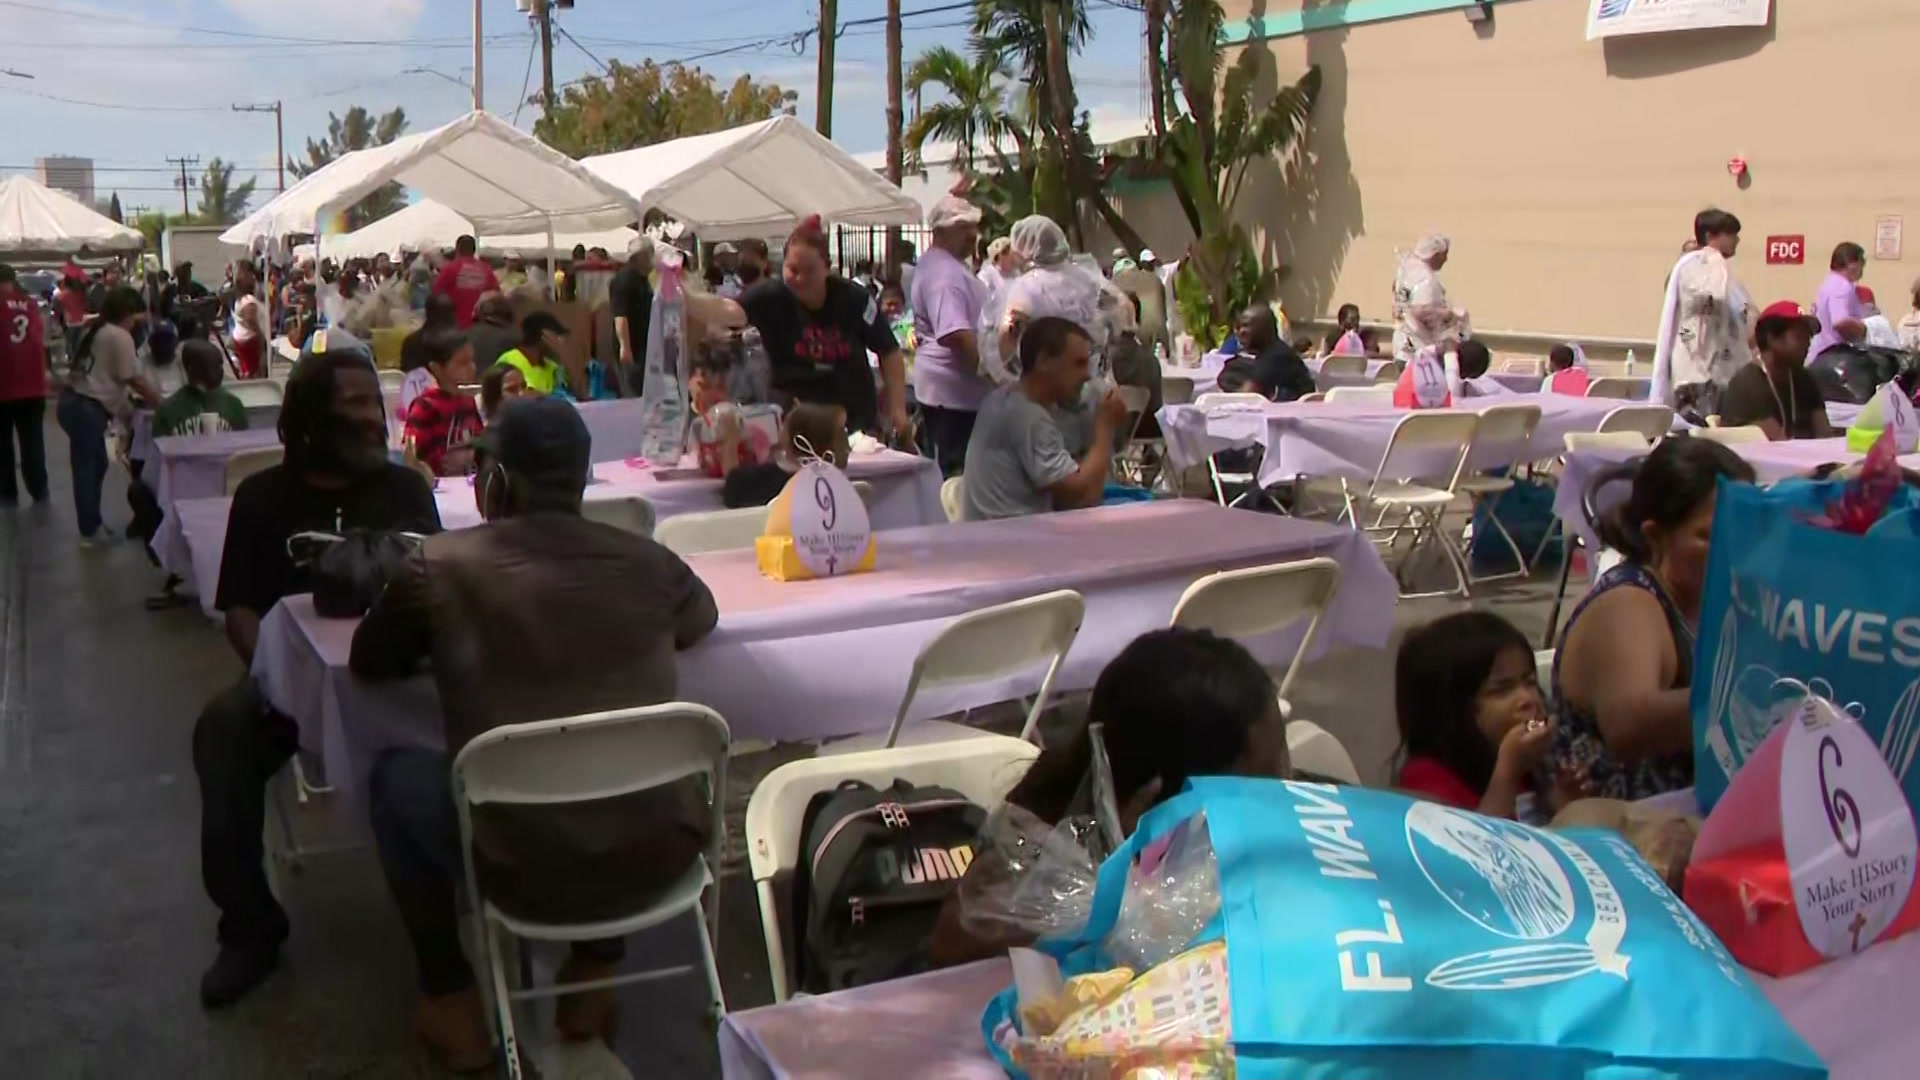 Local Organizations Come Together On Good Friday To Serve Homeless At Miami Rescue Mission